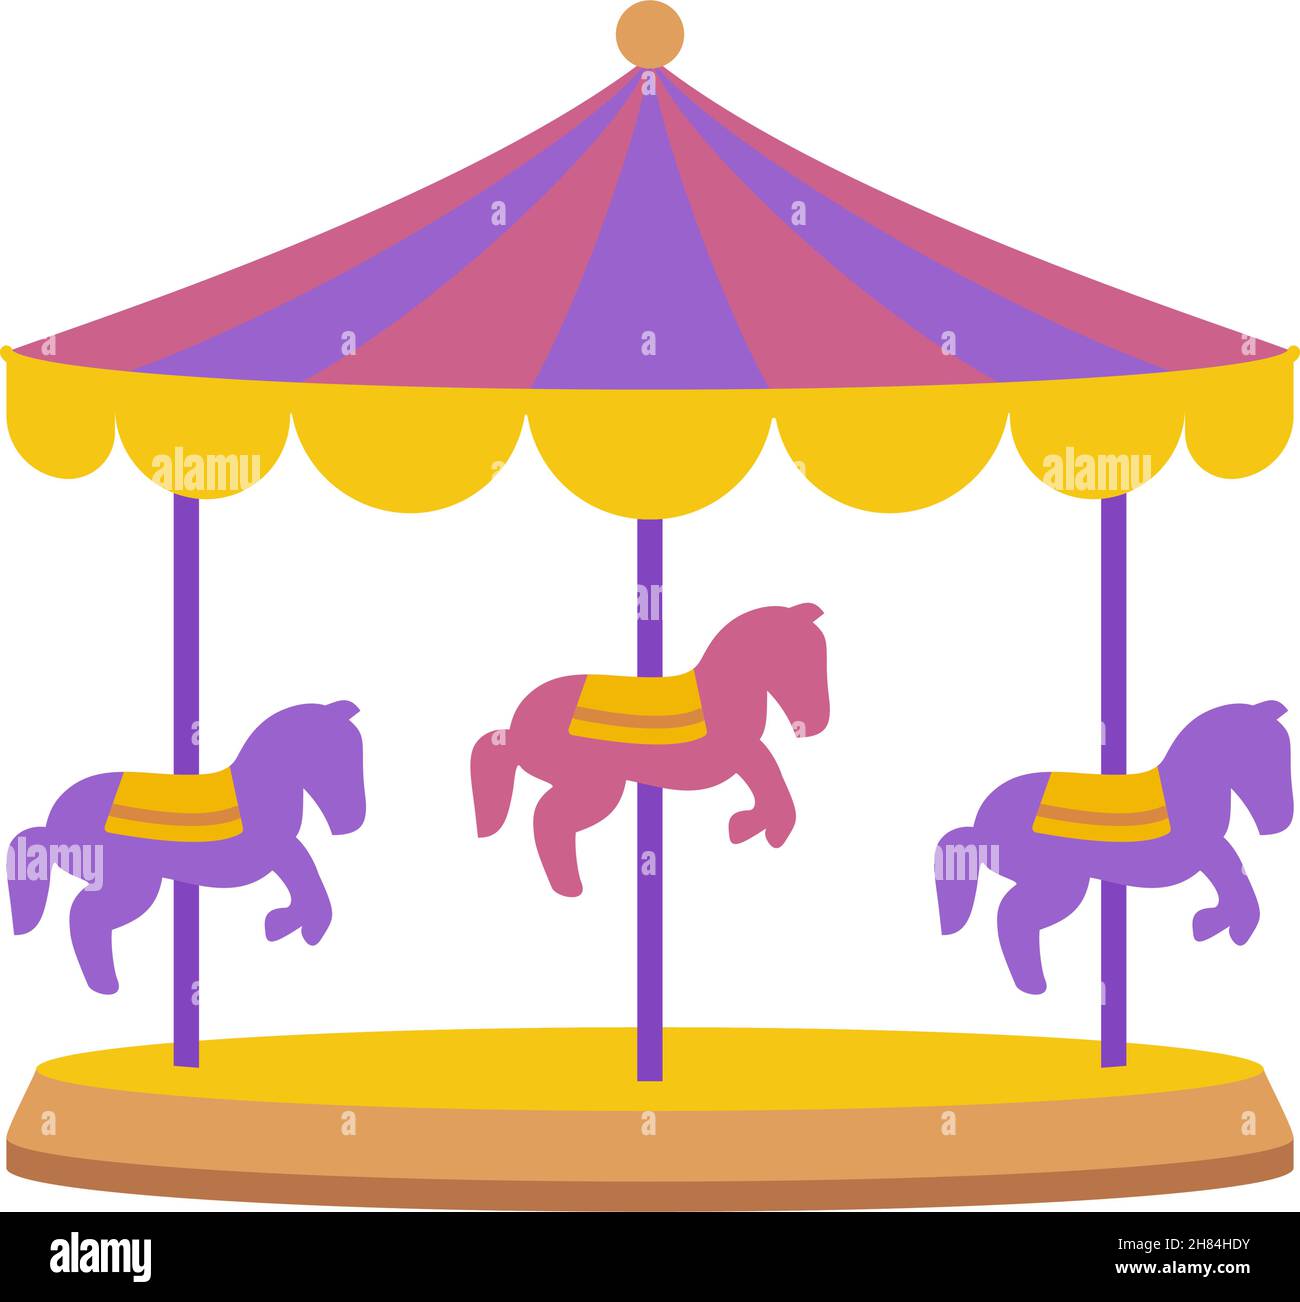 Carousel or merry-go-round with carousel horses for amusement ride in colorful vector icon Stock Vector